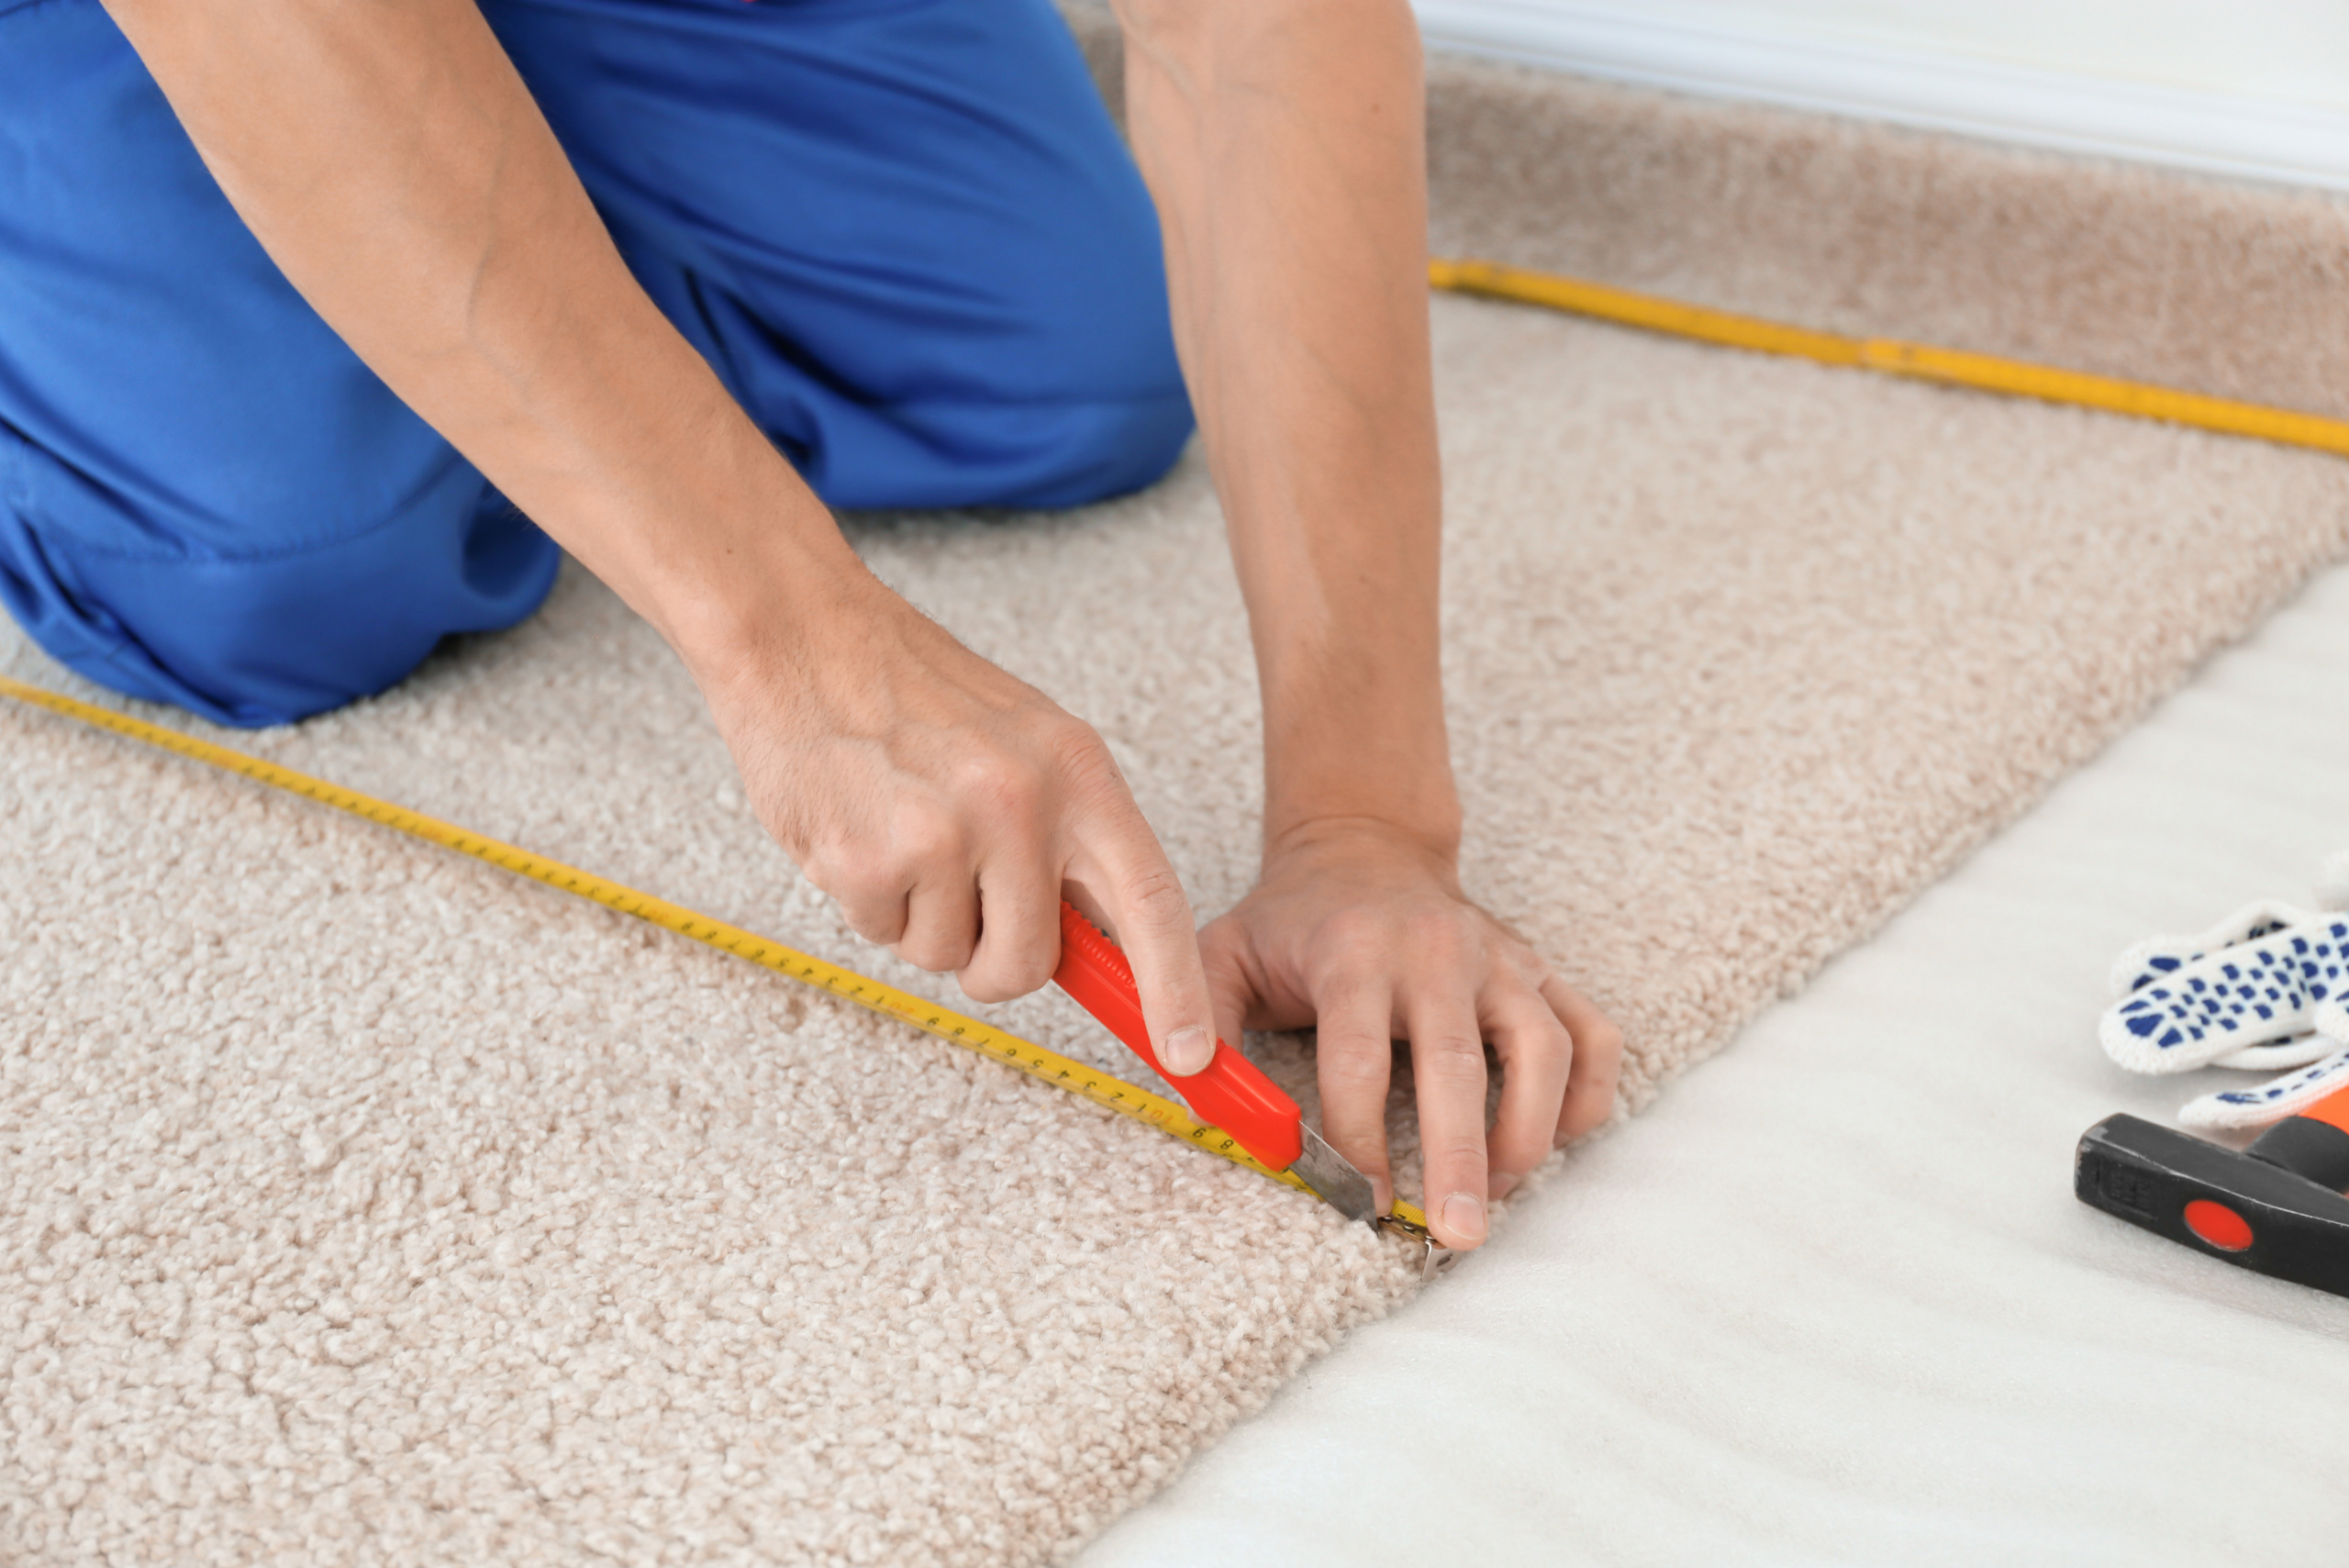 Worker using utility knife and measure tape edge to cut the carpet in a straight line.